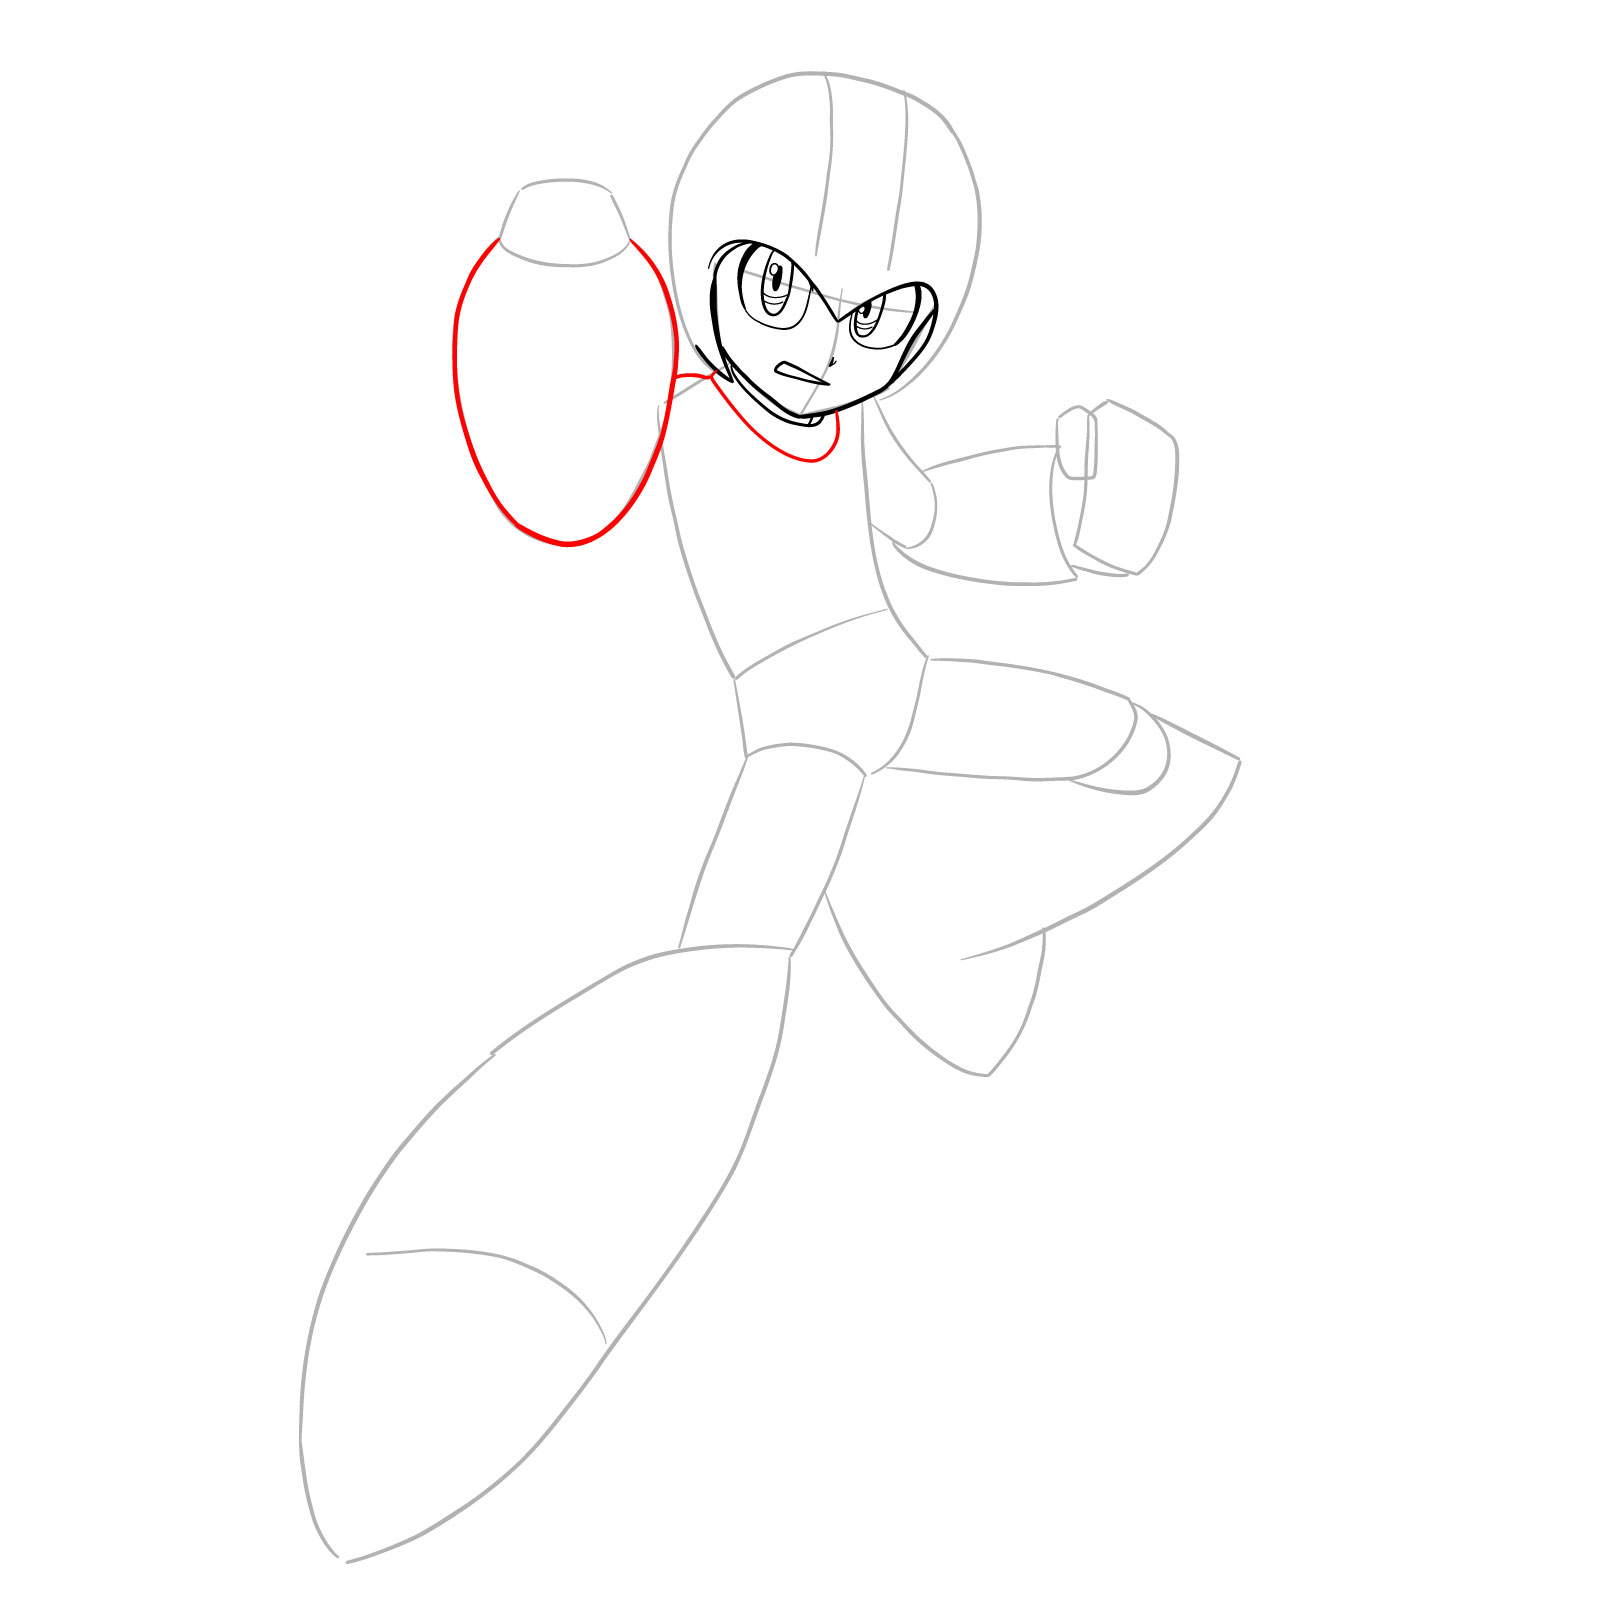 How to draw Mega Man from the 11th game - step 10